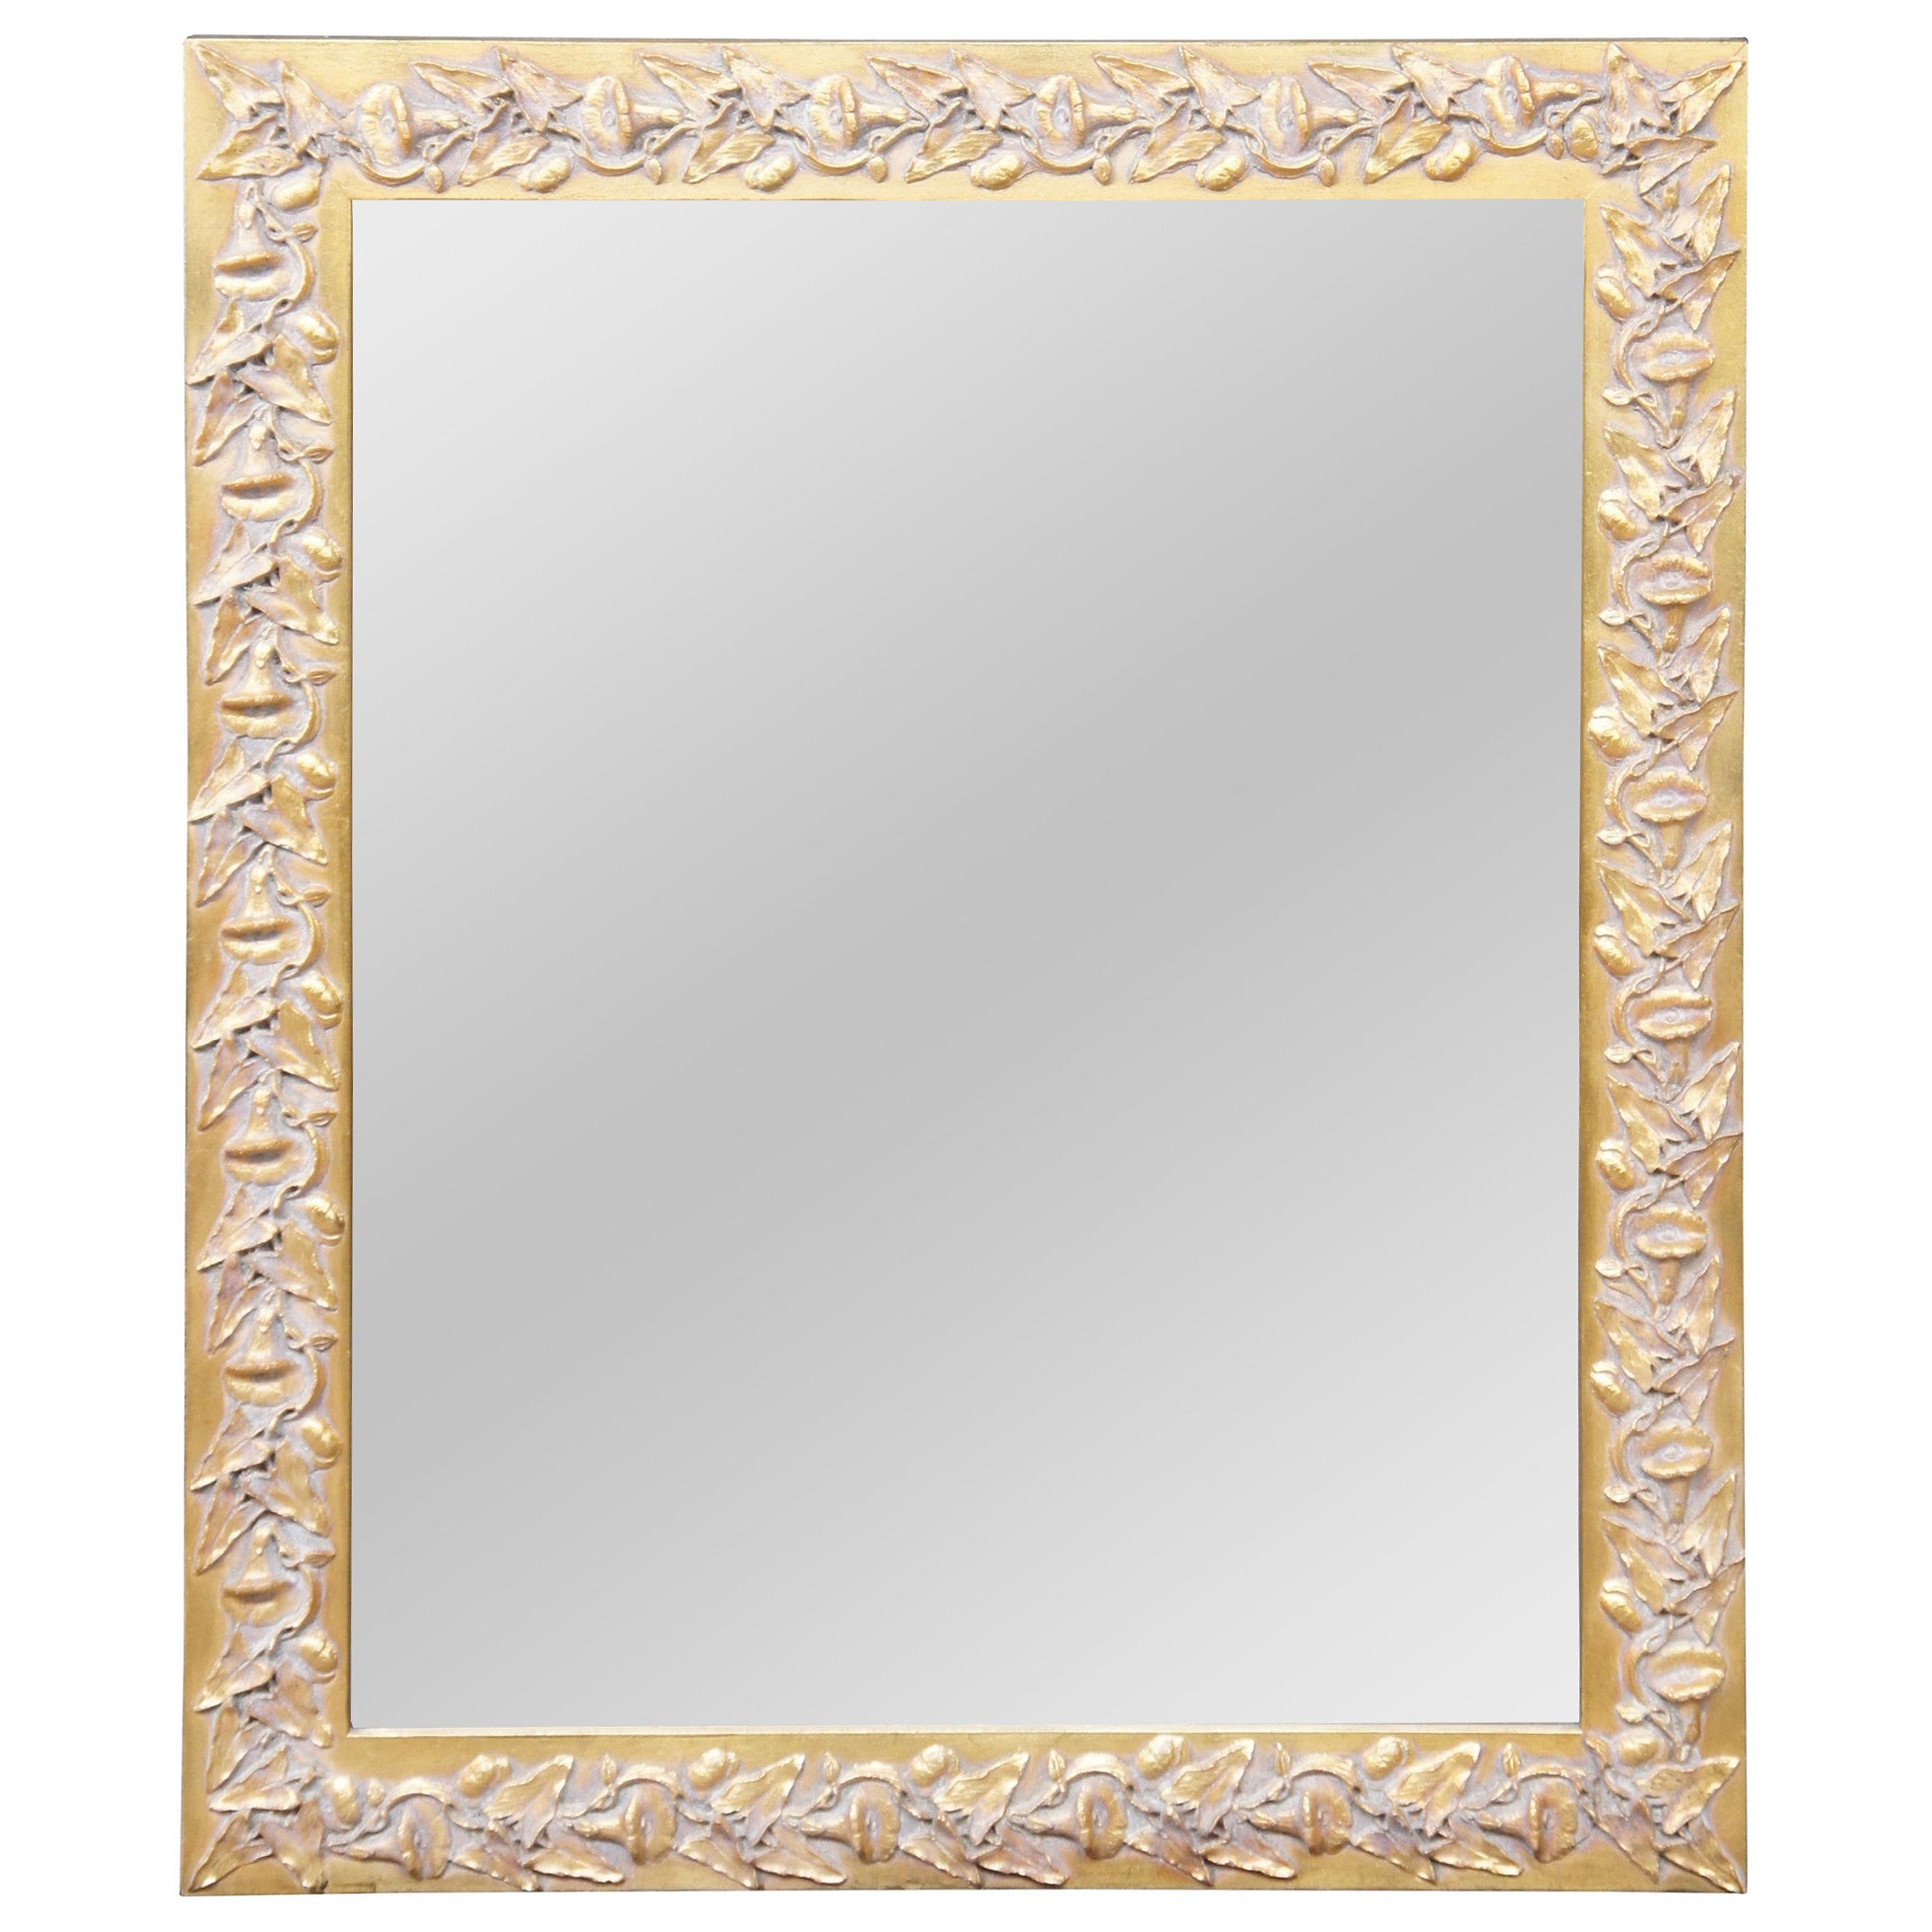 Vintage Neoclassical Low Relief Gold Toned Rectangular Mirror Beveled Glass 33"